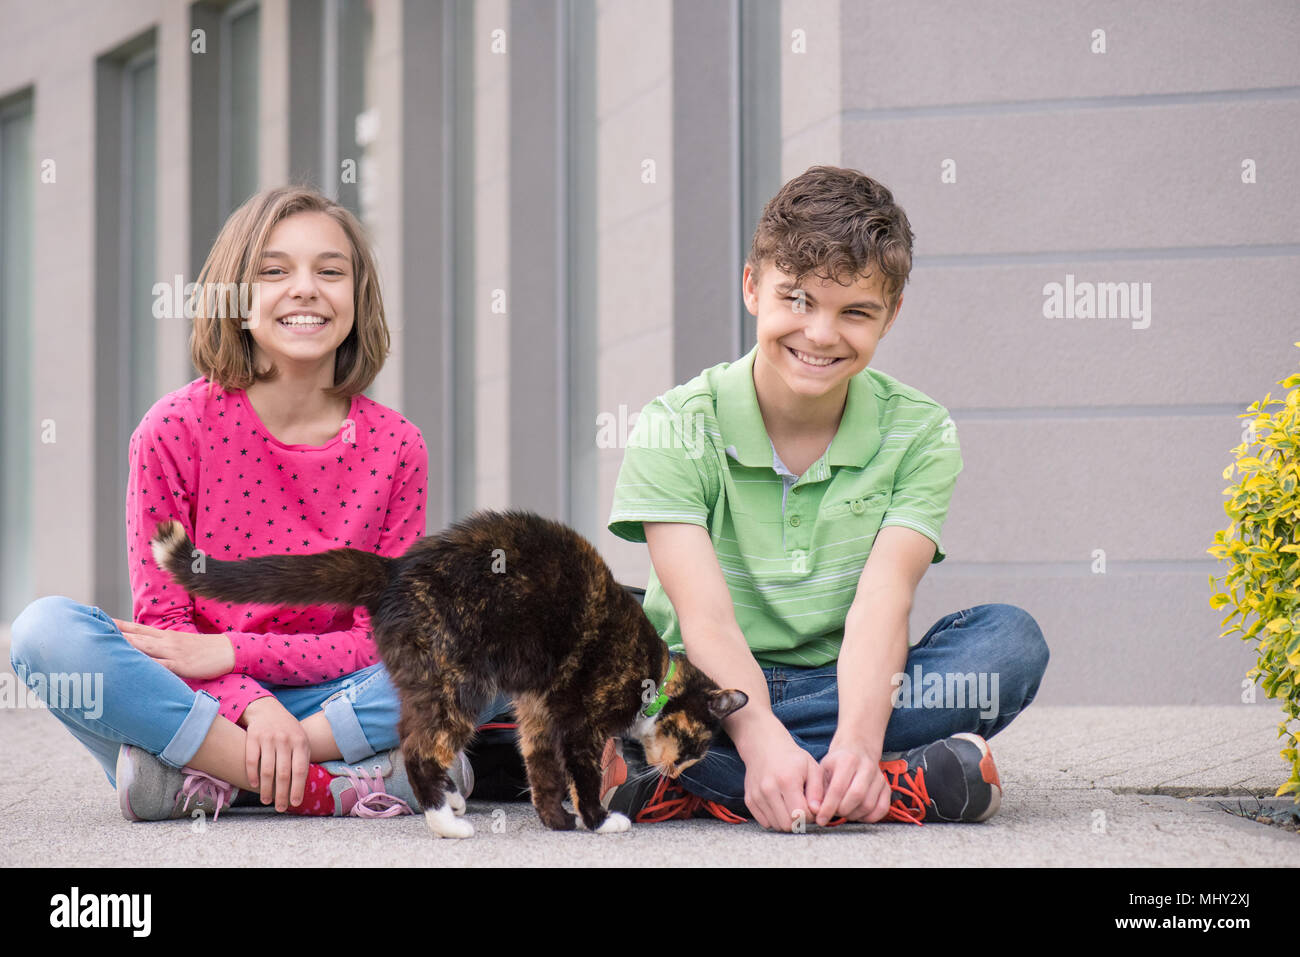 Teen boy and girl Playing with cat Banque D'Images